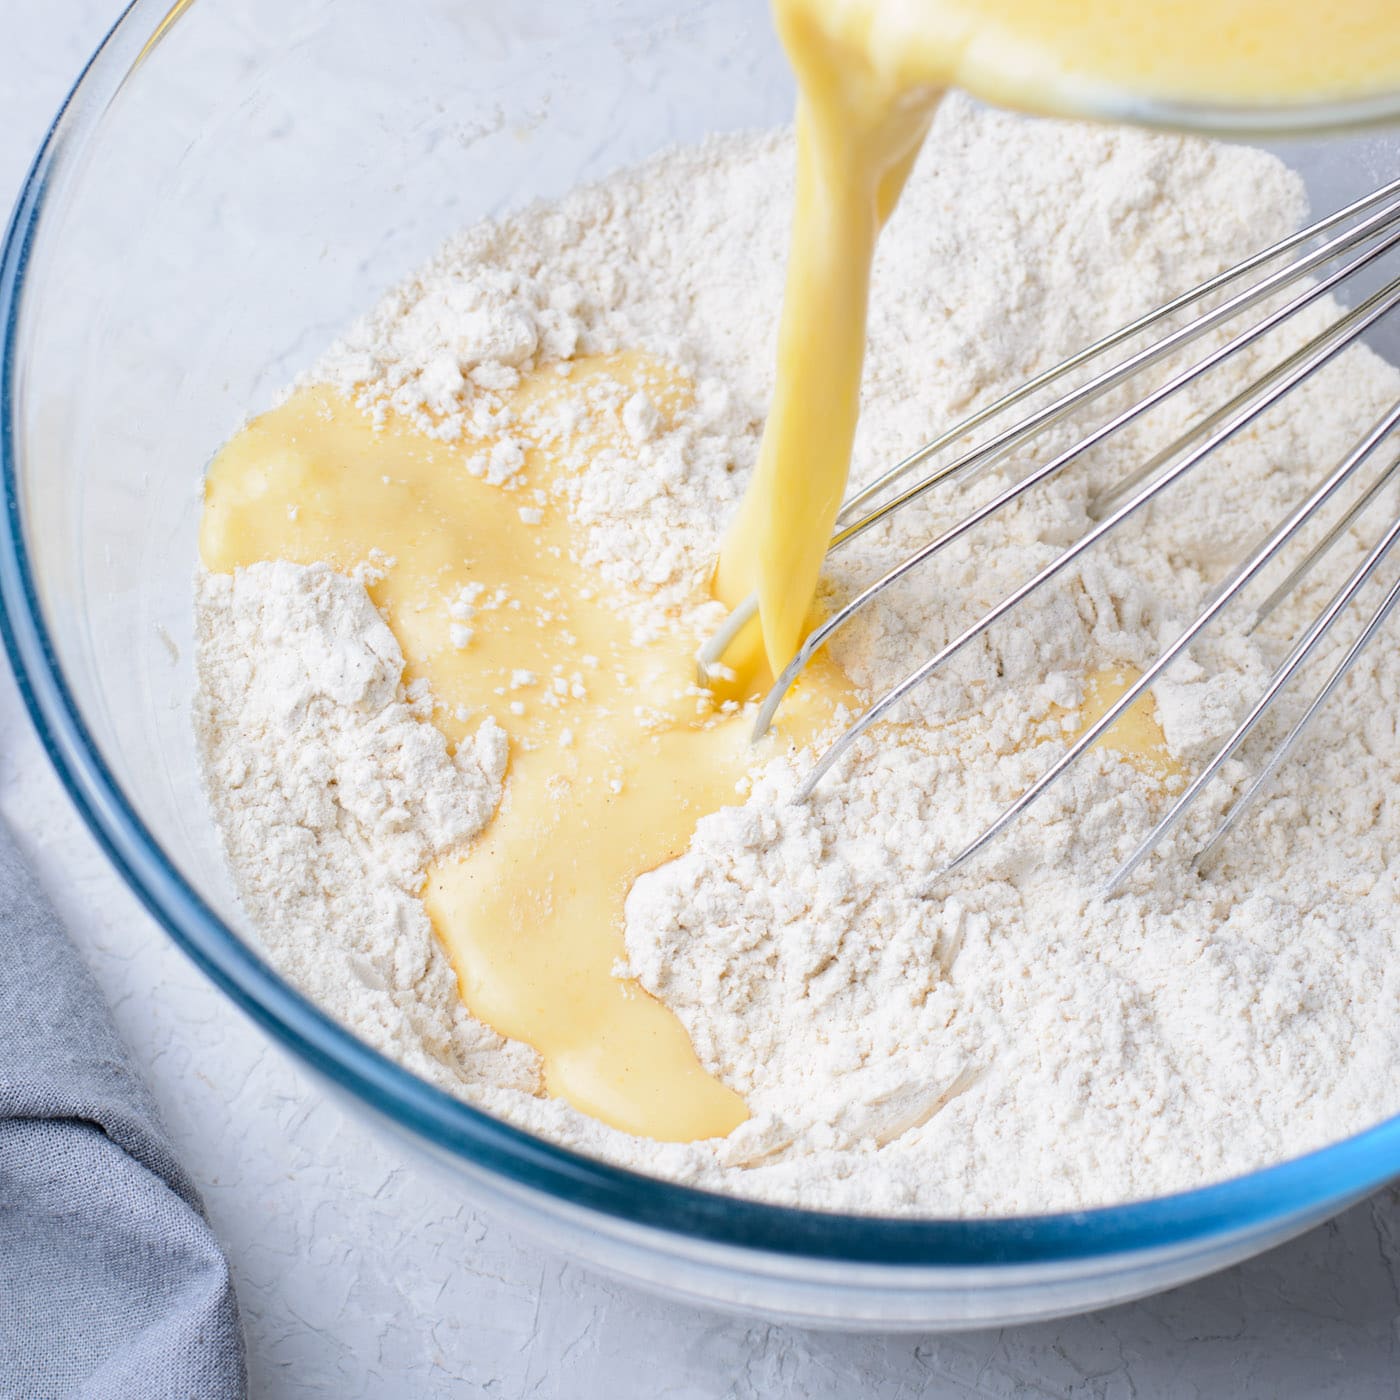 pouring batter into dry ingredients for banana fritters